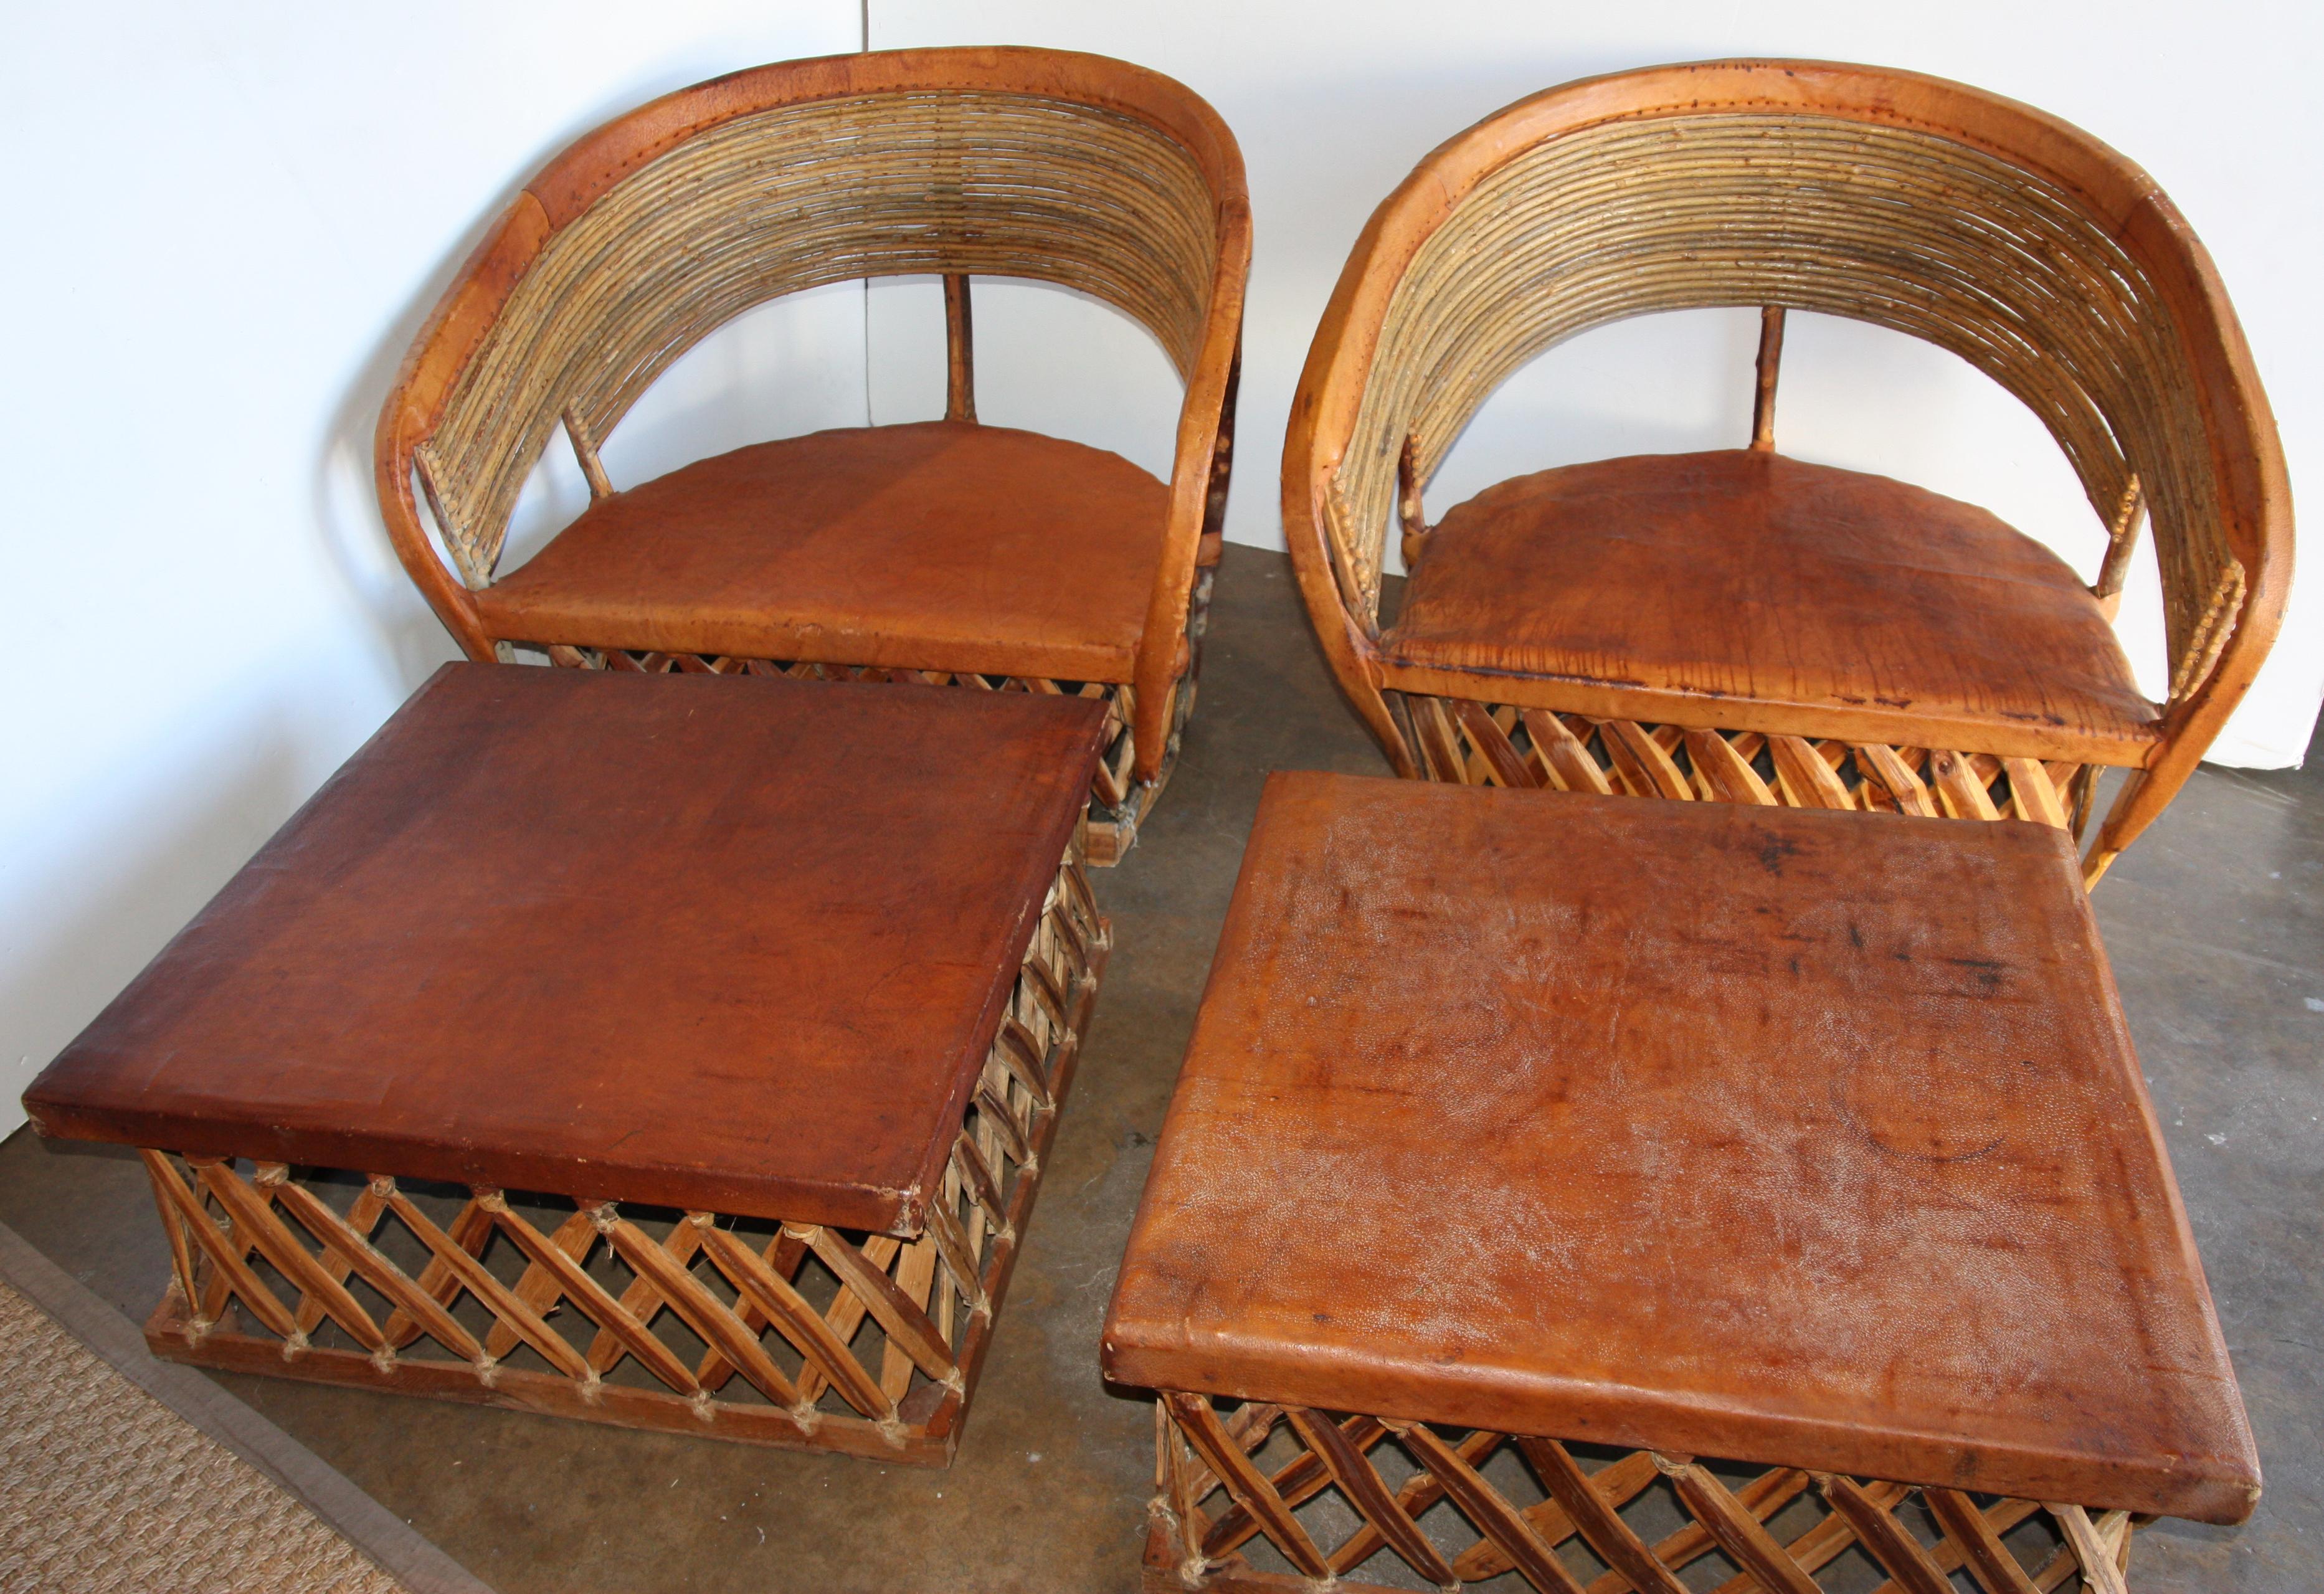 Equipale furniture brings with it a remarkable rustic Mexican flair. This handmade rustic leather furniture, crafted from tanned pigskin and Mexican cedar strips, is durable and comfortable. Perfect for a sunroom, bar, patio or ranch house.
We are